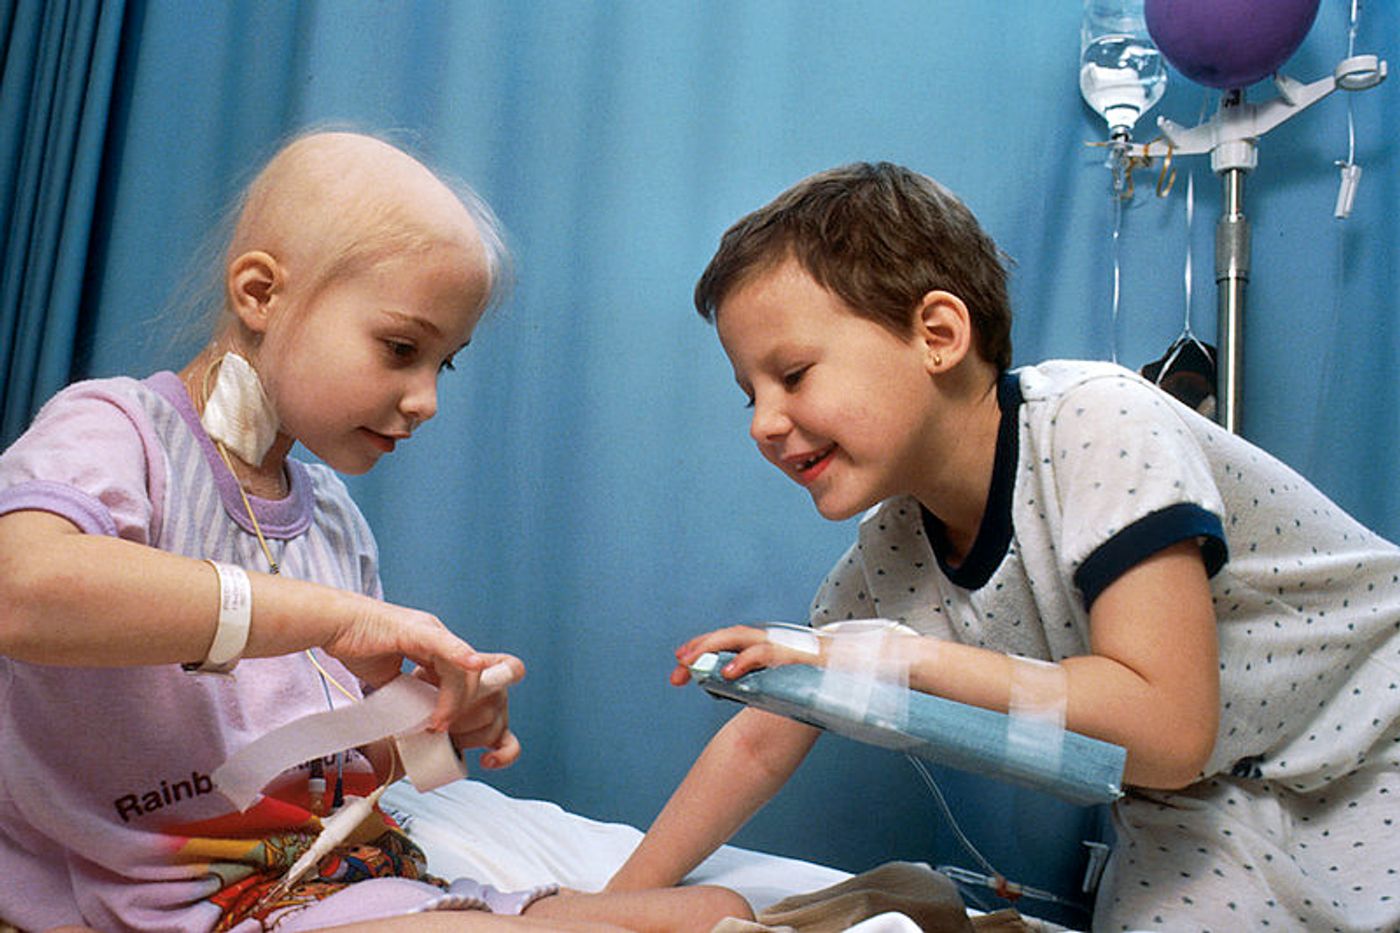 Two young girls with acute lymphocytic leukemia (ALL) receiving chemotherapy. Credit: National Cancer Institute